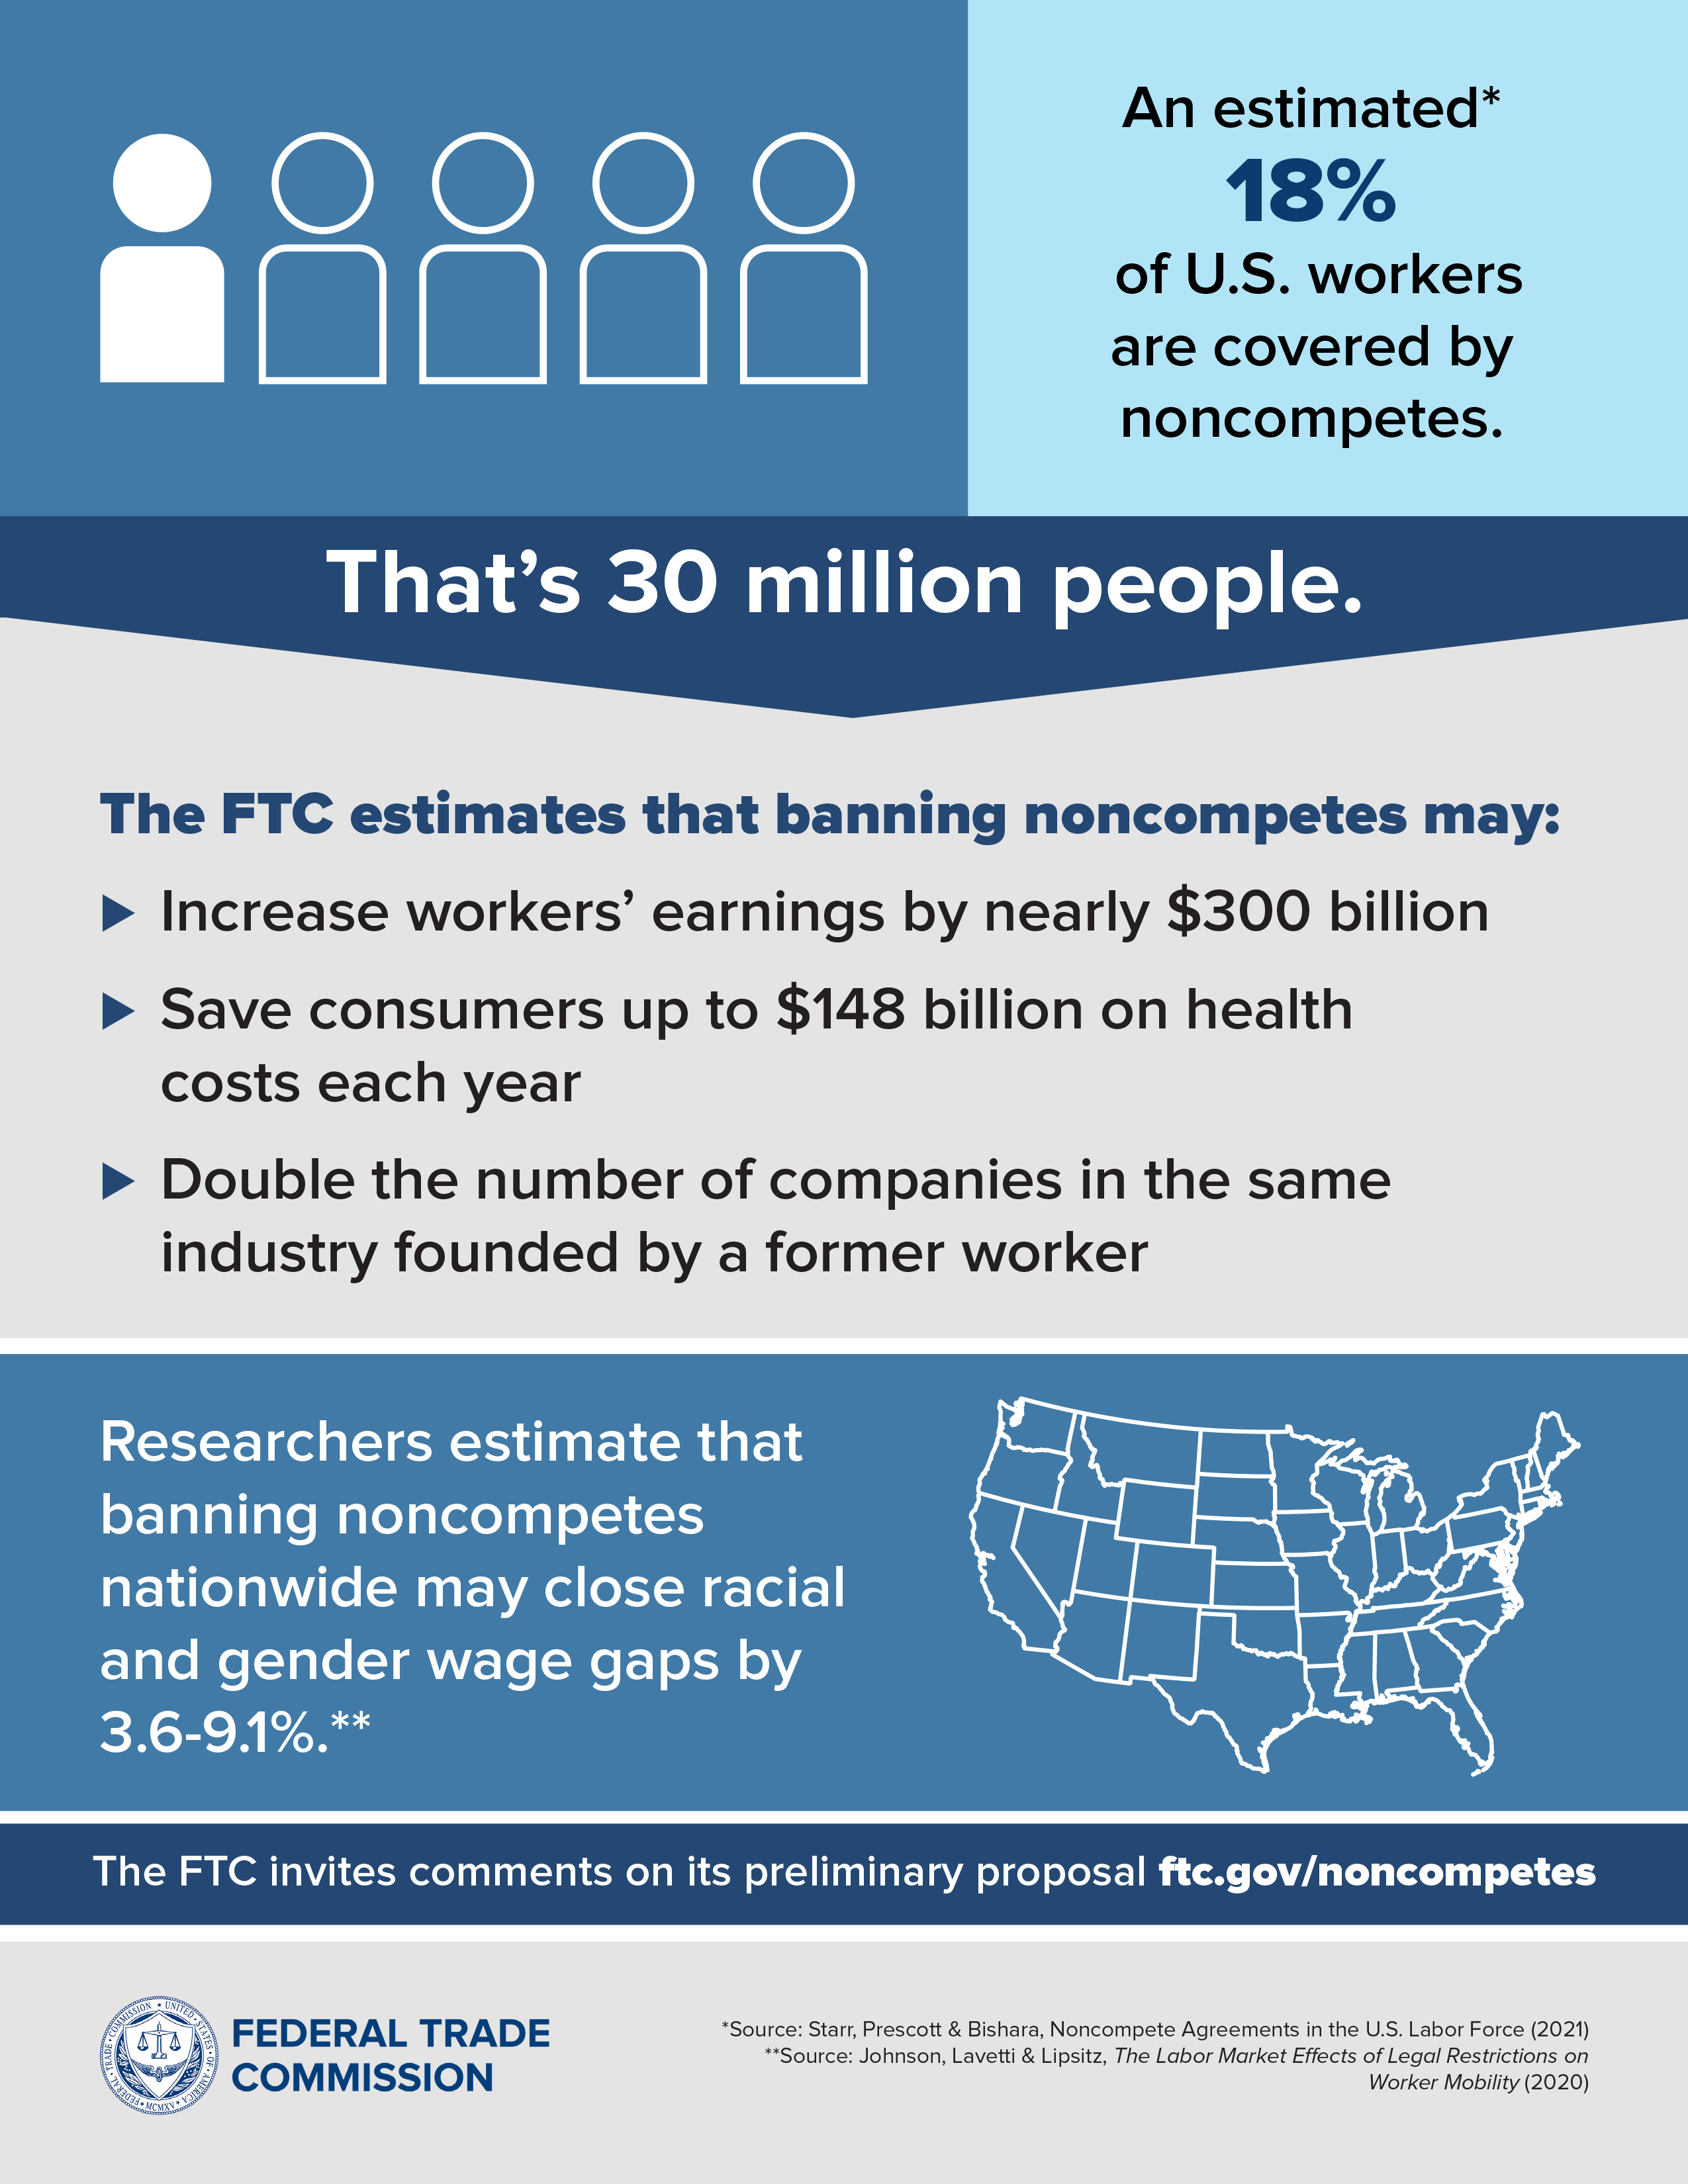 NPRM: Noncompete Infographic. An estimated* 18% of U.S. workers are covered by noncompetes.